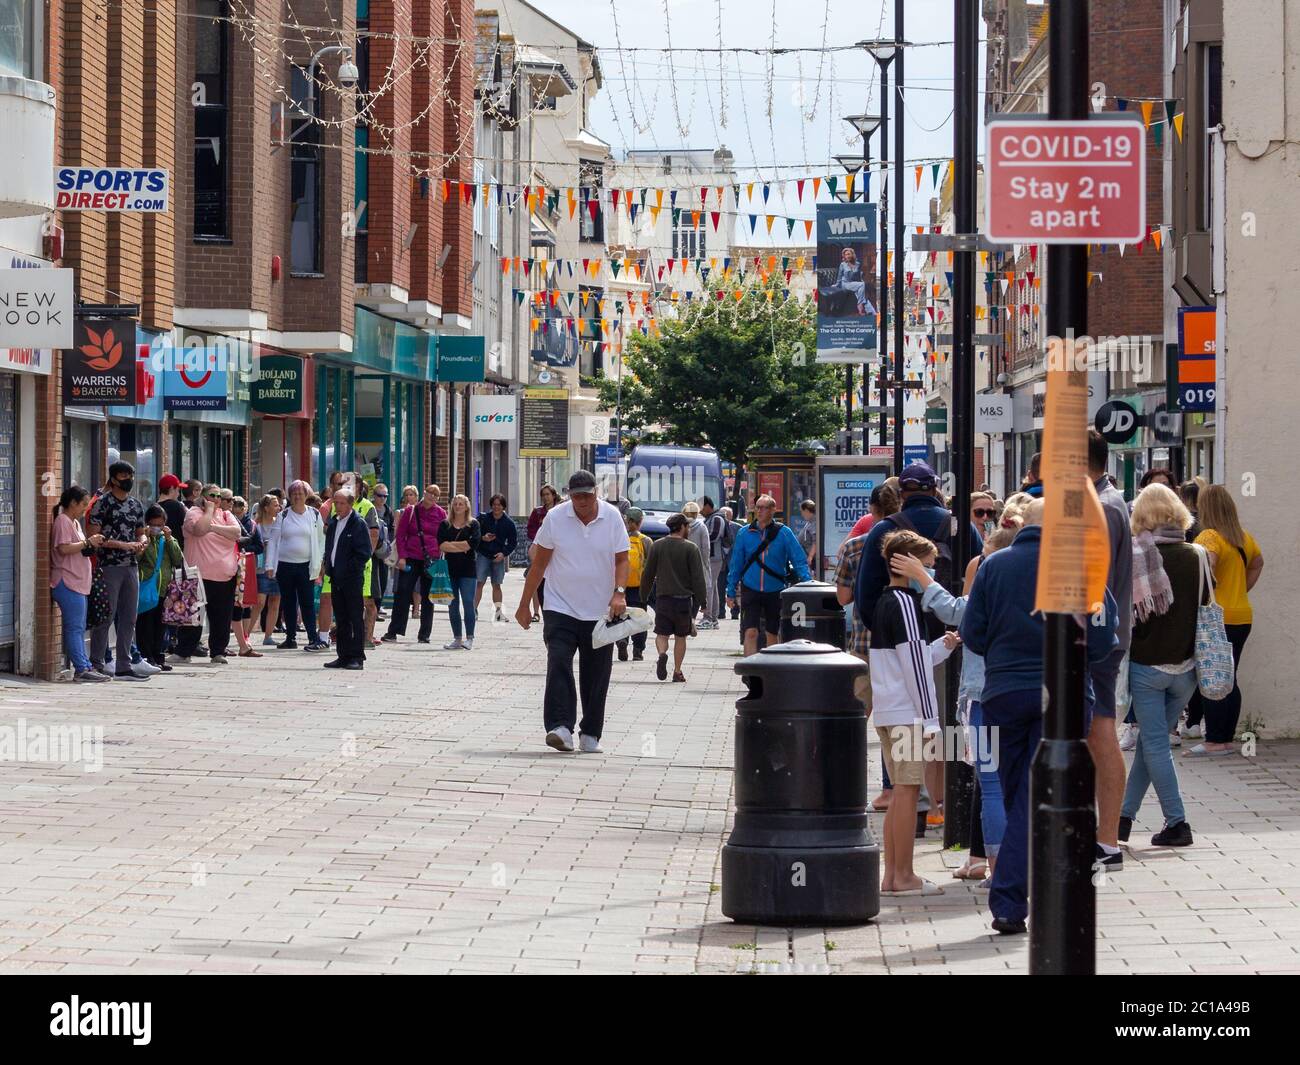 Worthing, Sussex, UK; 15th June 2020; Queue of People Waiting For sports Direct to Open For the first time since the Covid-19 Pandemic Lockdown Stock Photo